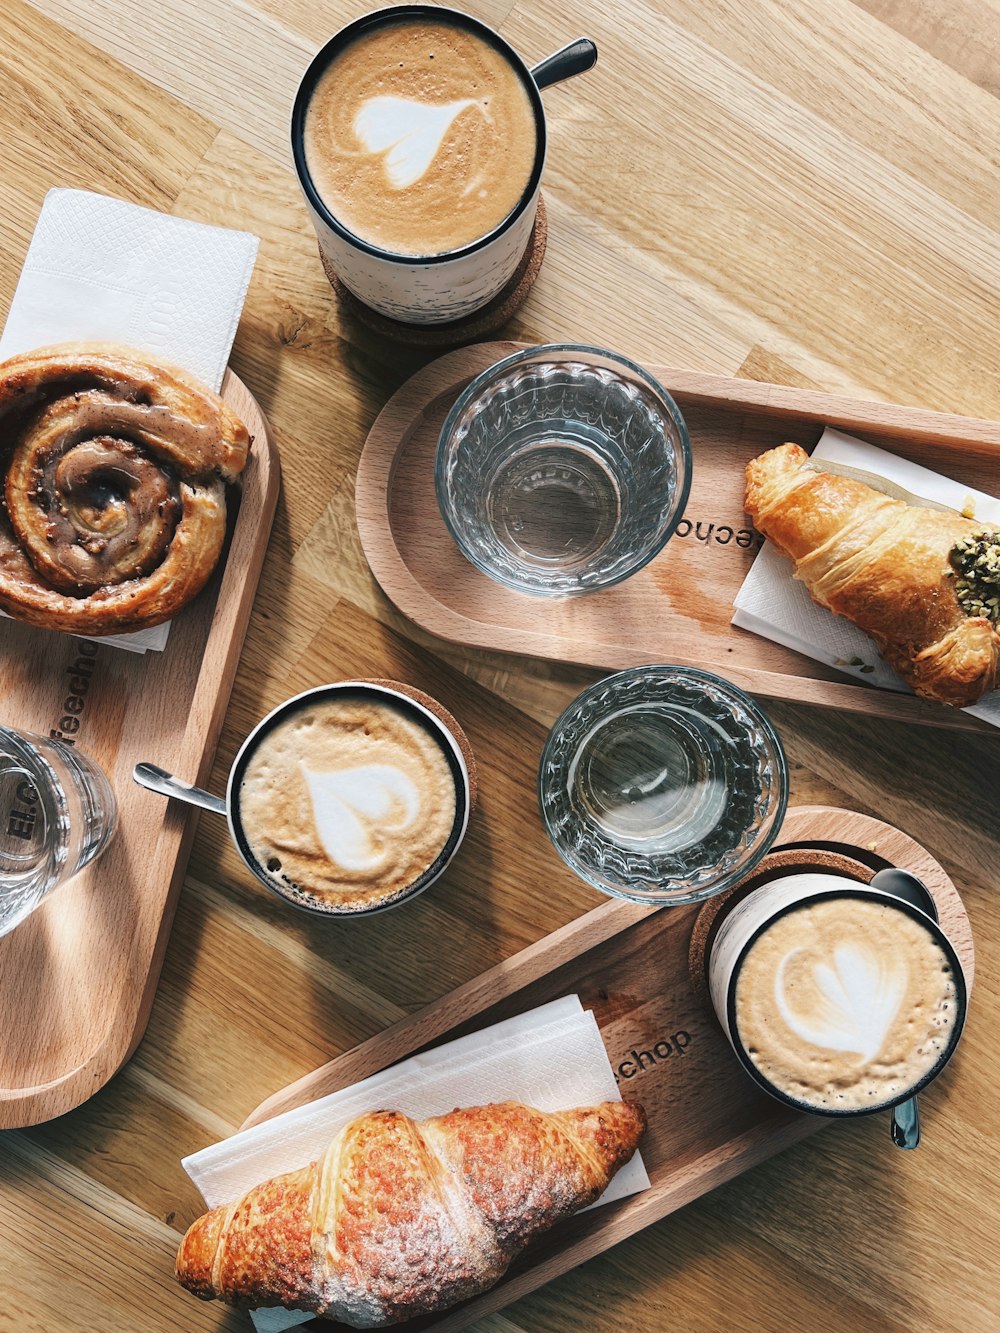 a wooden table topped with pastries and drinks